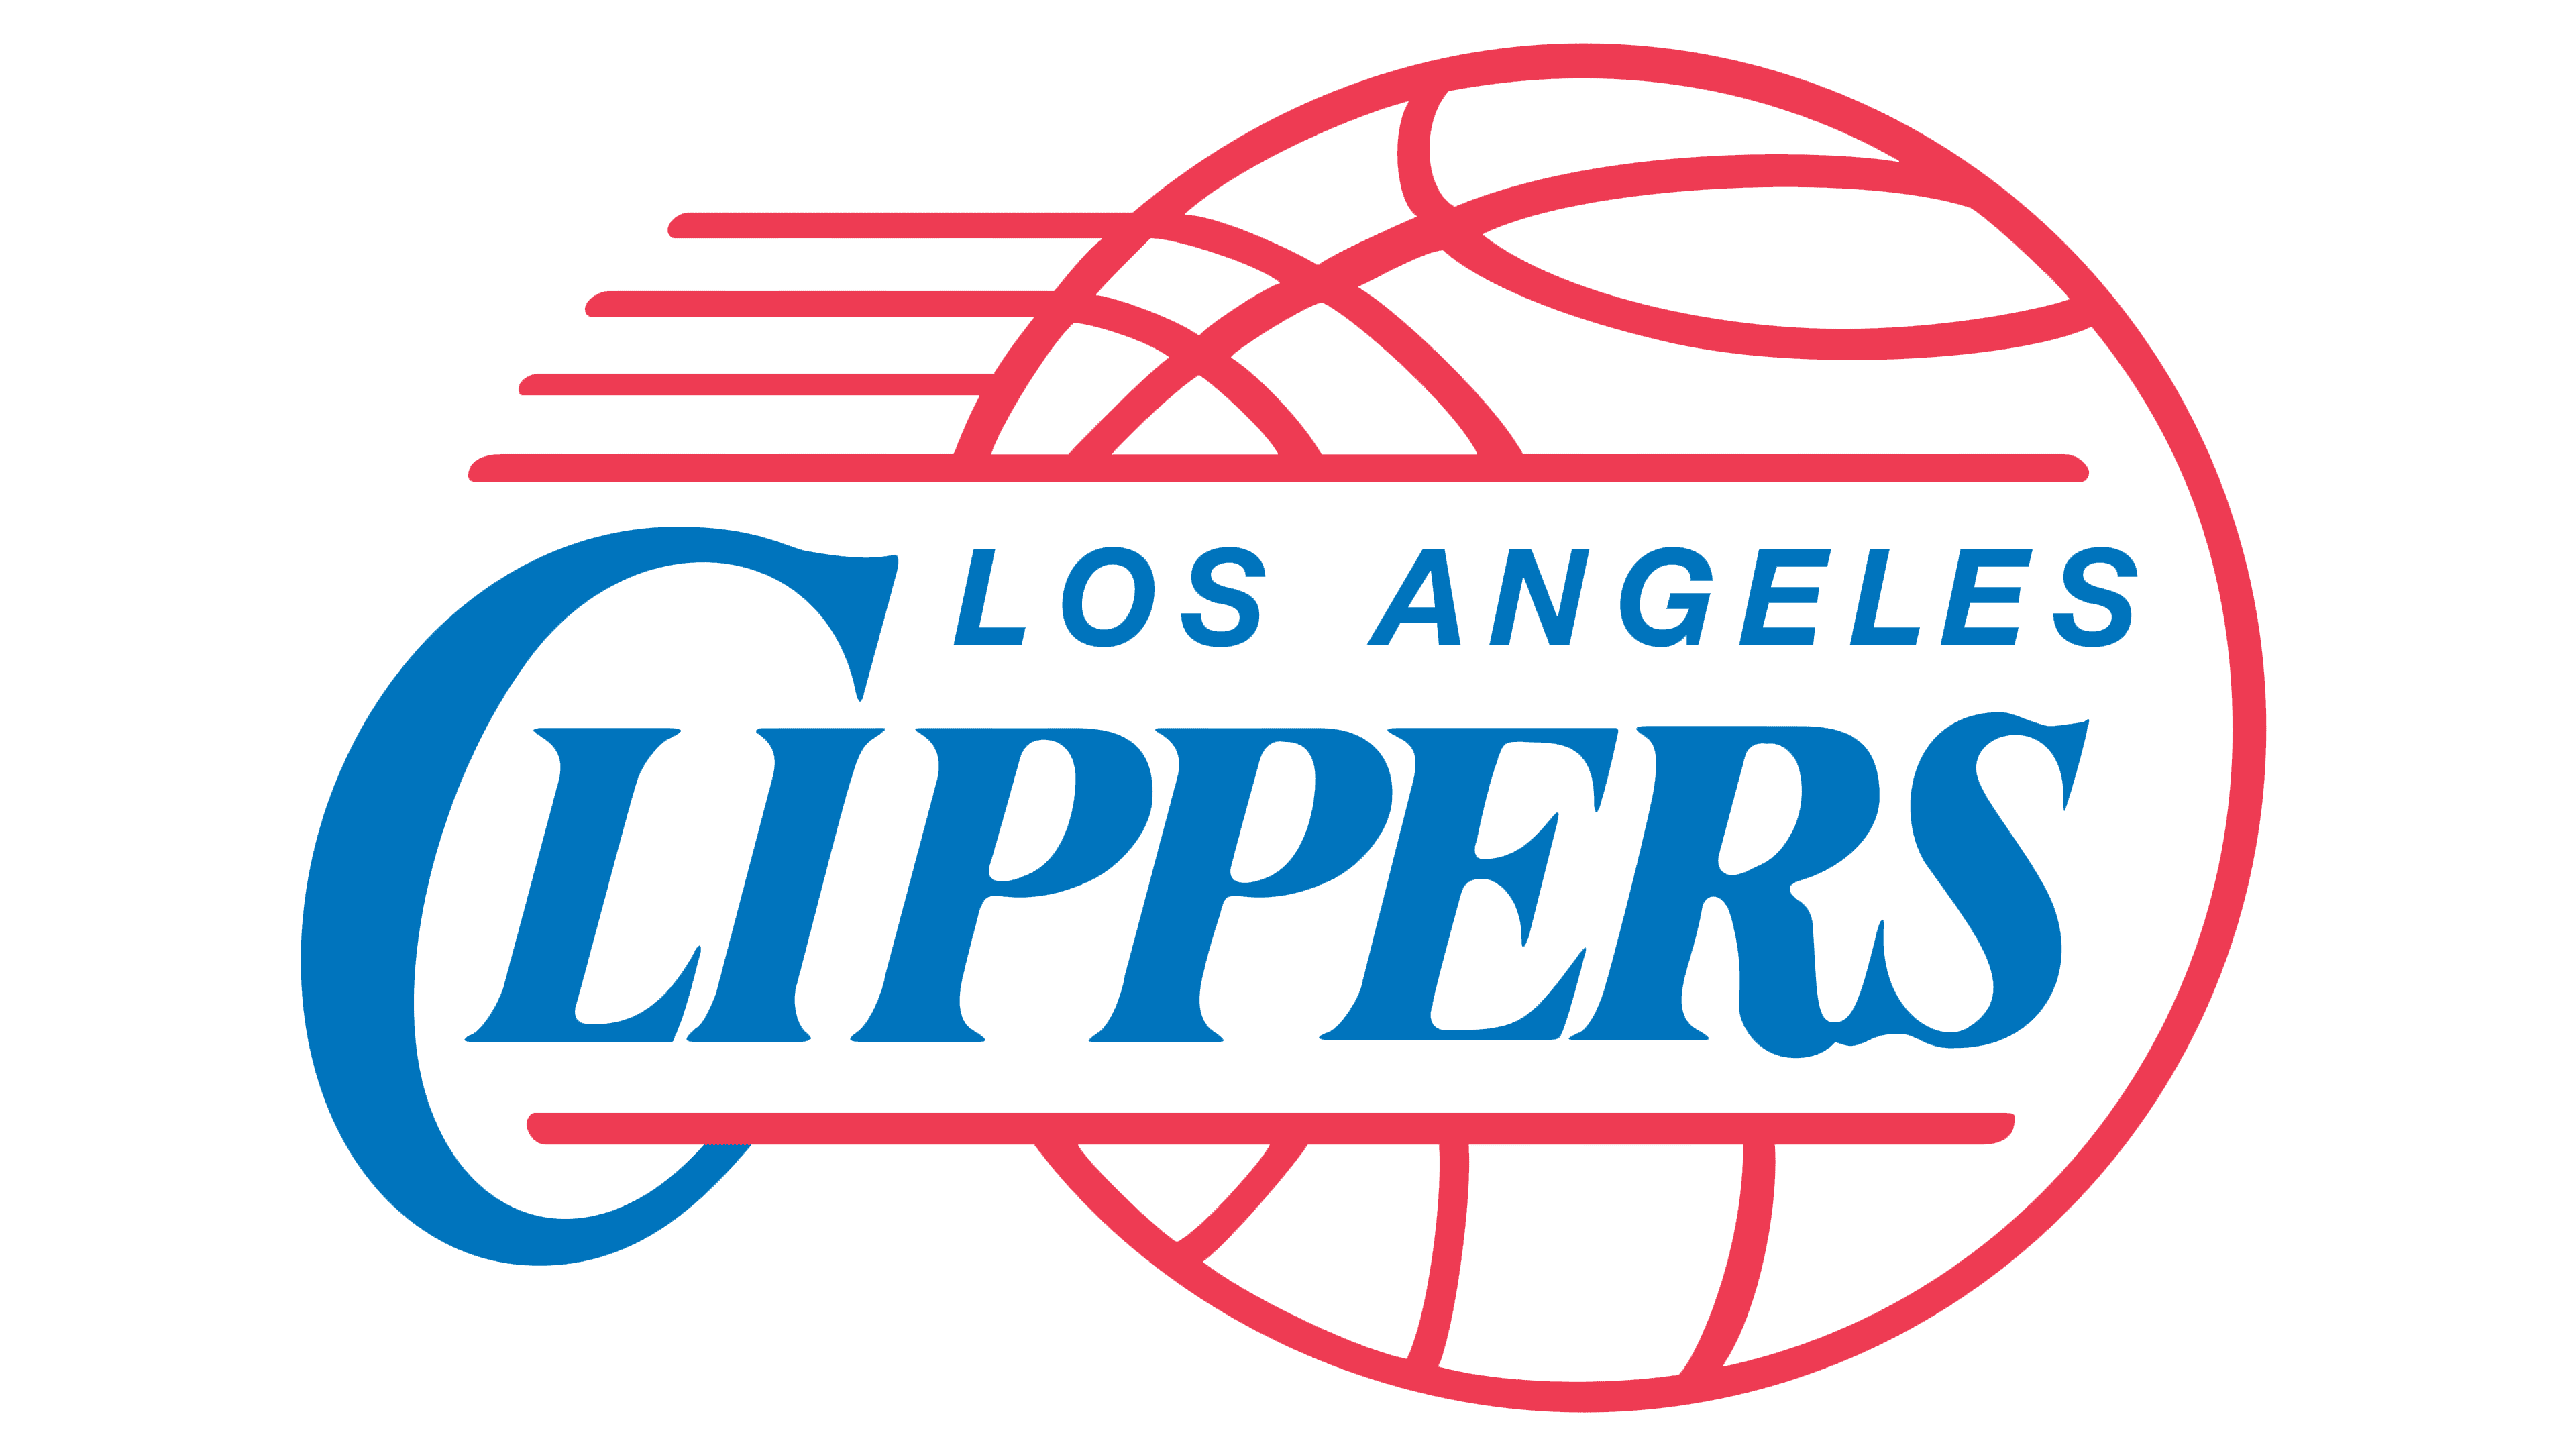 Clippers Logo PNG Pic